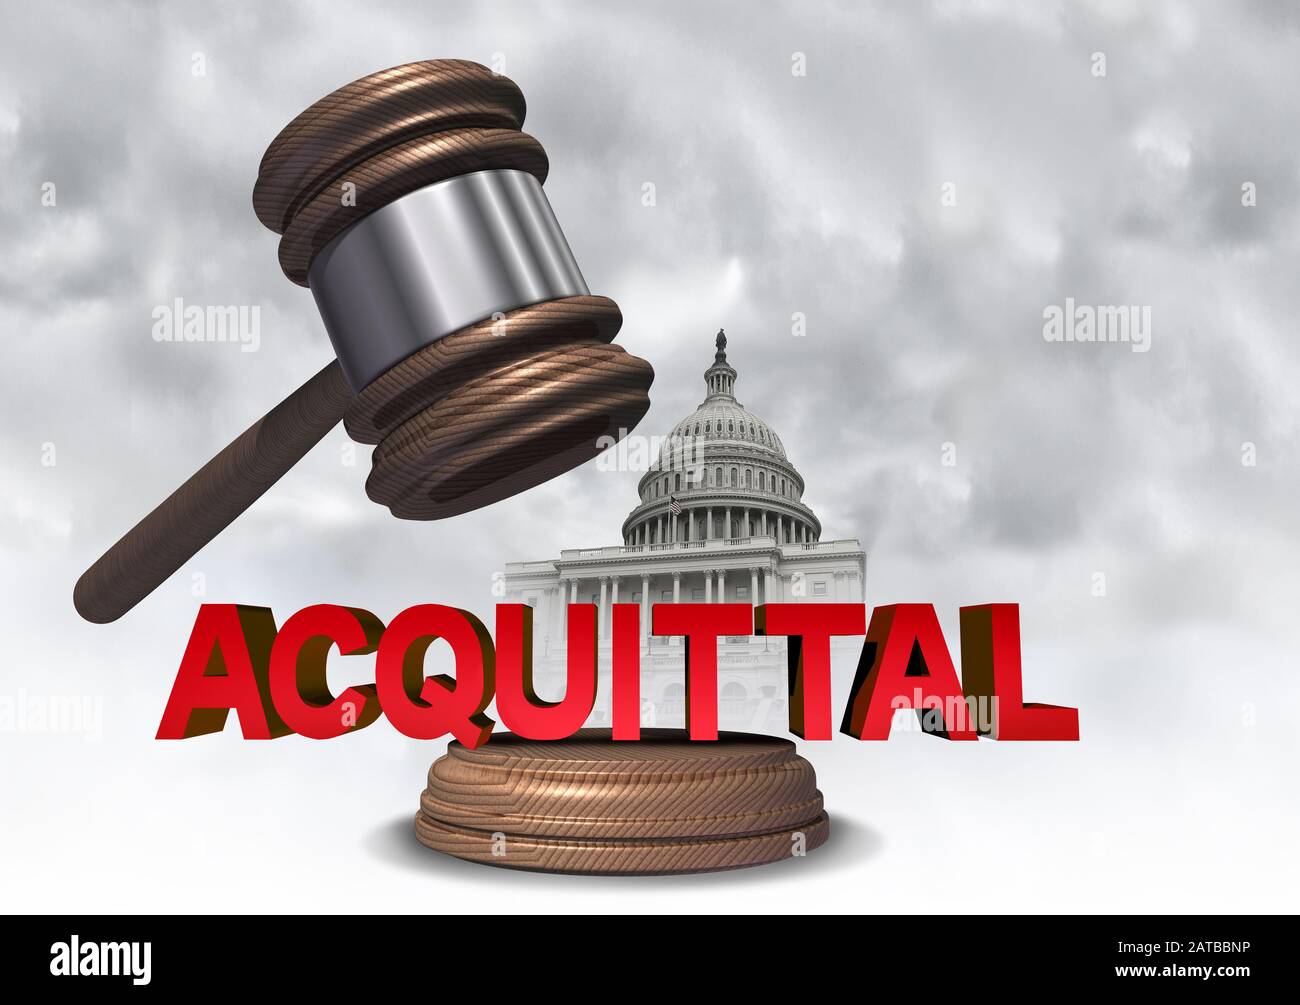 Acquittal and acquitted as a not guilty judgement to acquit a crime as a legal concept from a court of law as a gavel or judge mallet for a verdict. Stock Photo